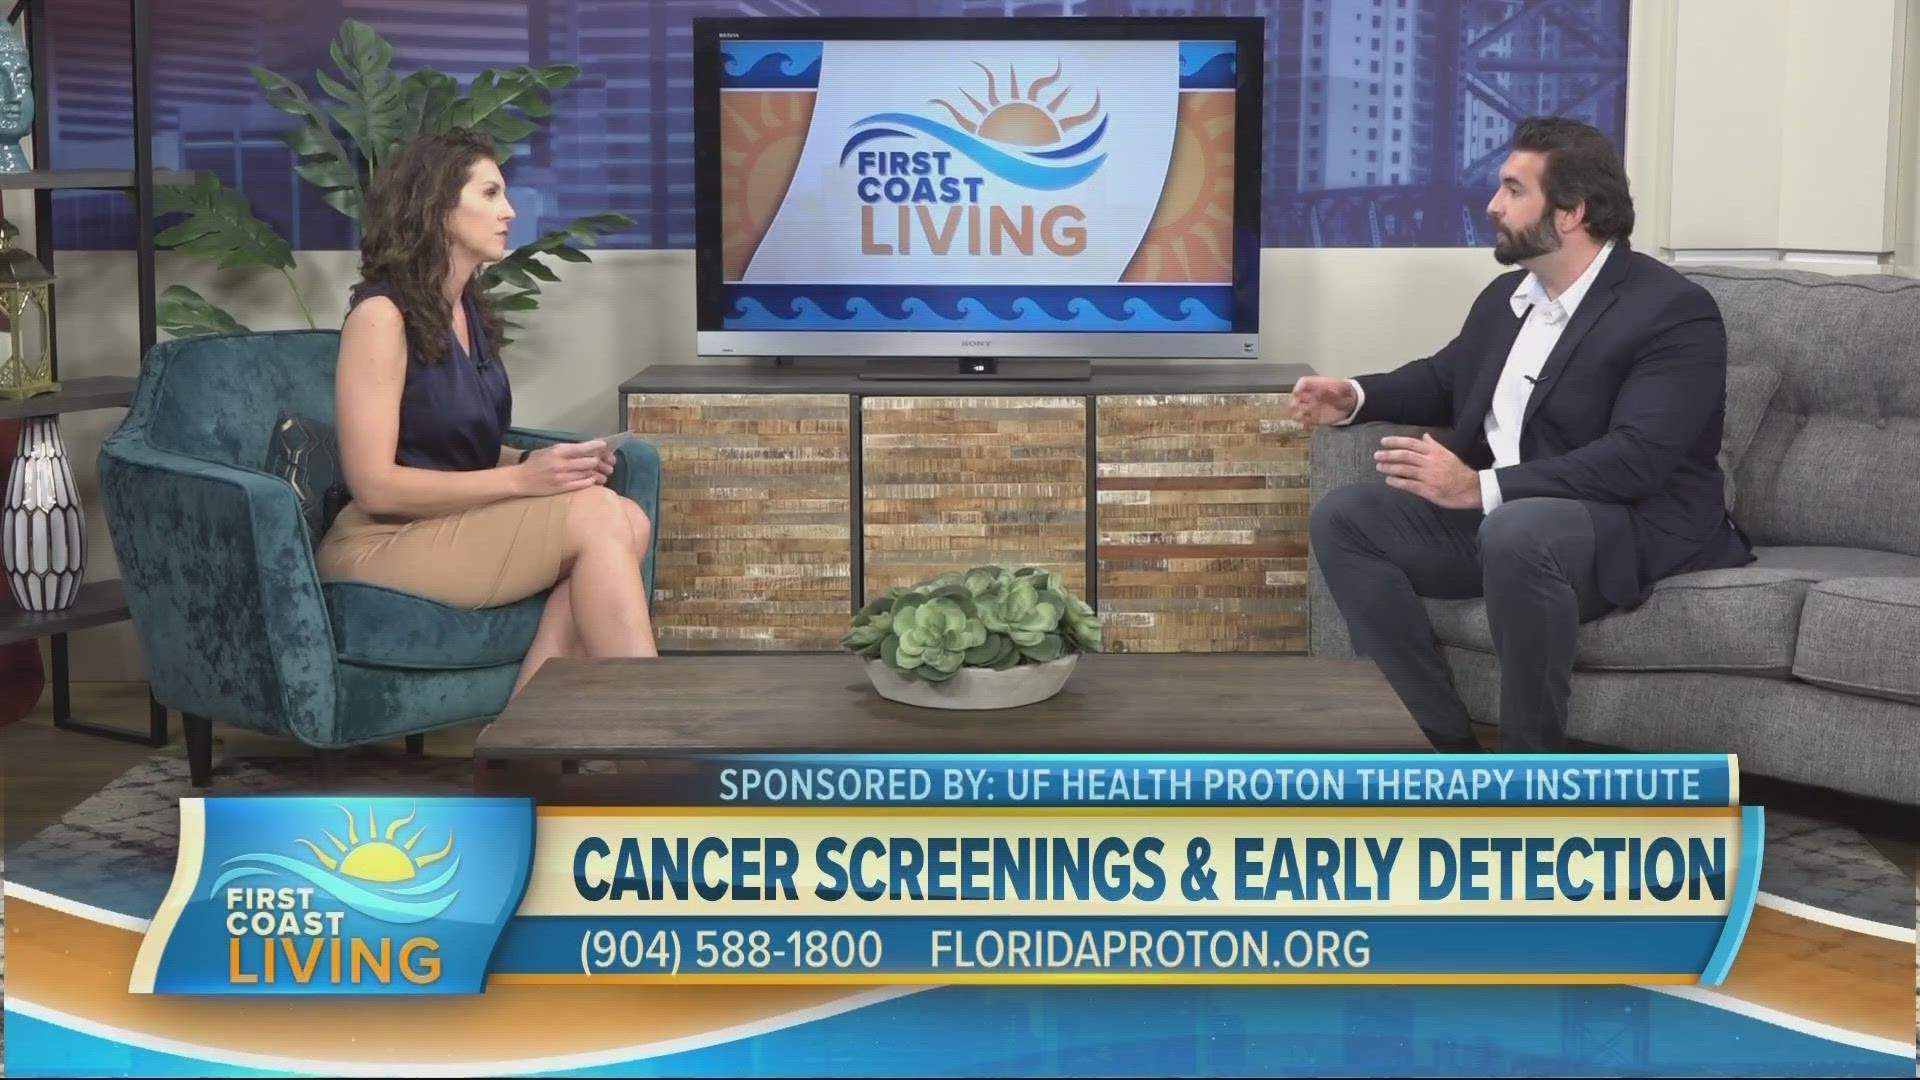 Radiation Oncologist at UF Health Proton Therapy Institute, Dr. Eric Brooks shares important information on lung and breast cancer screenings.